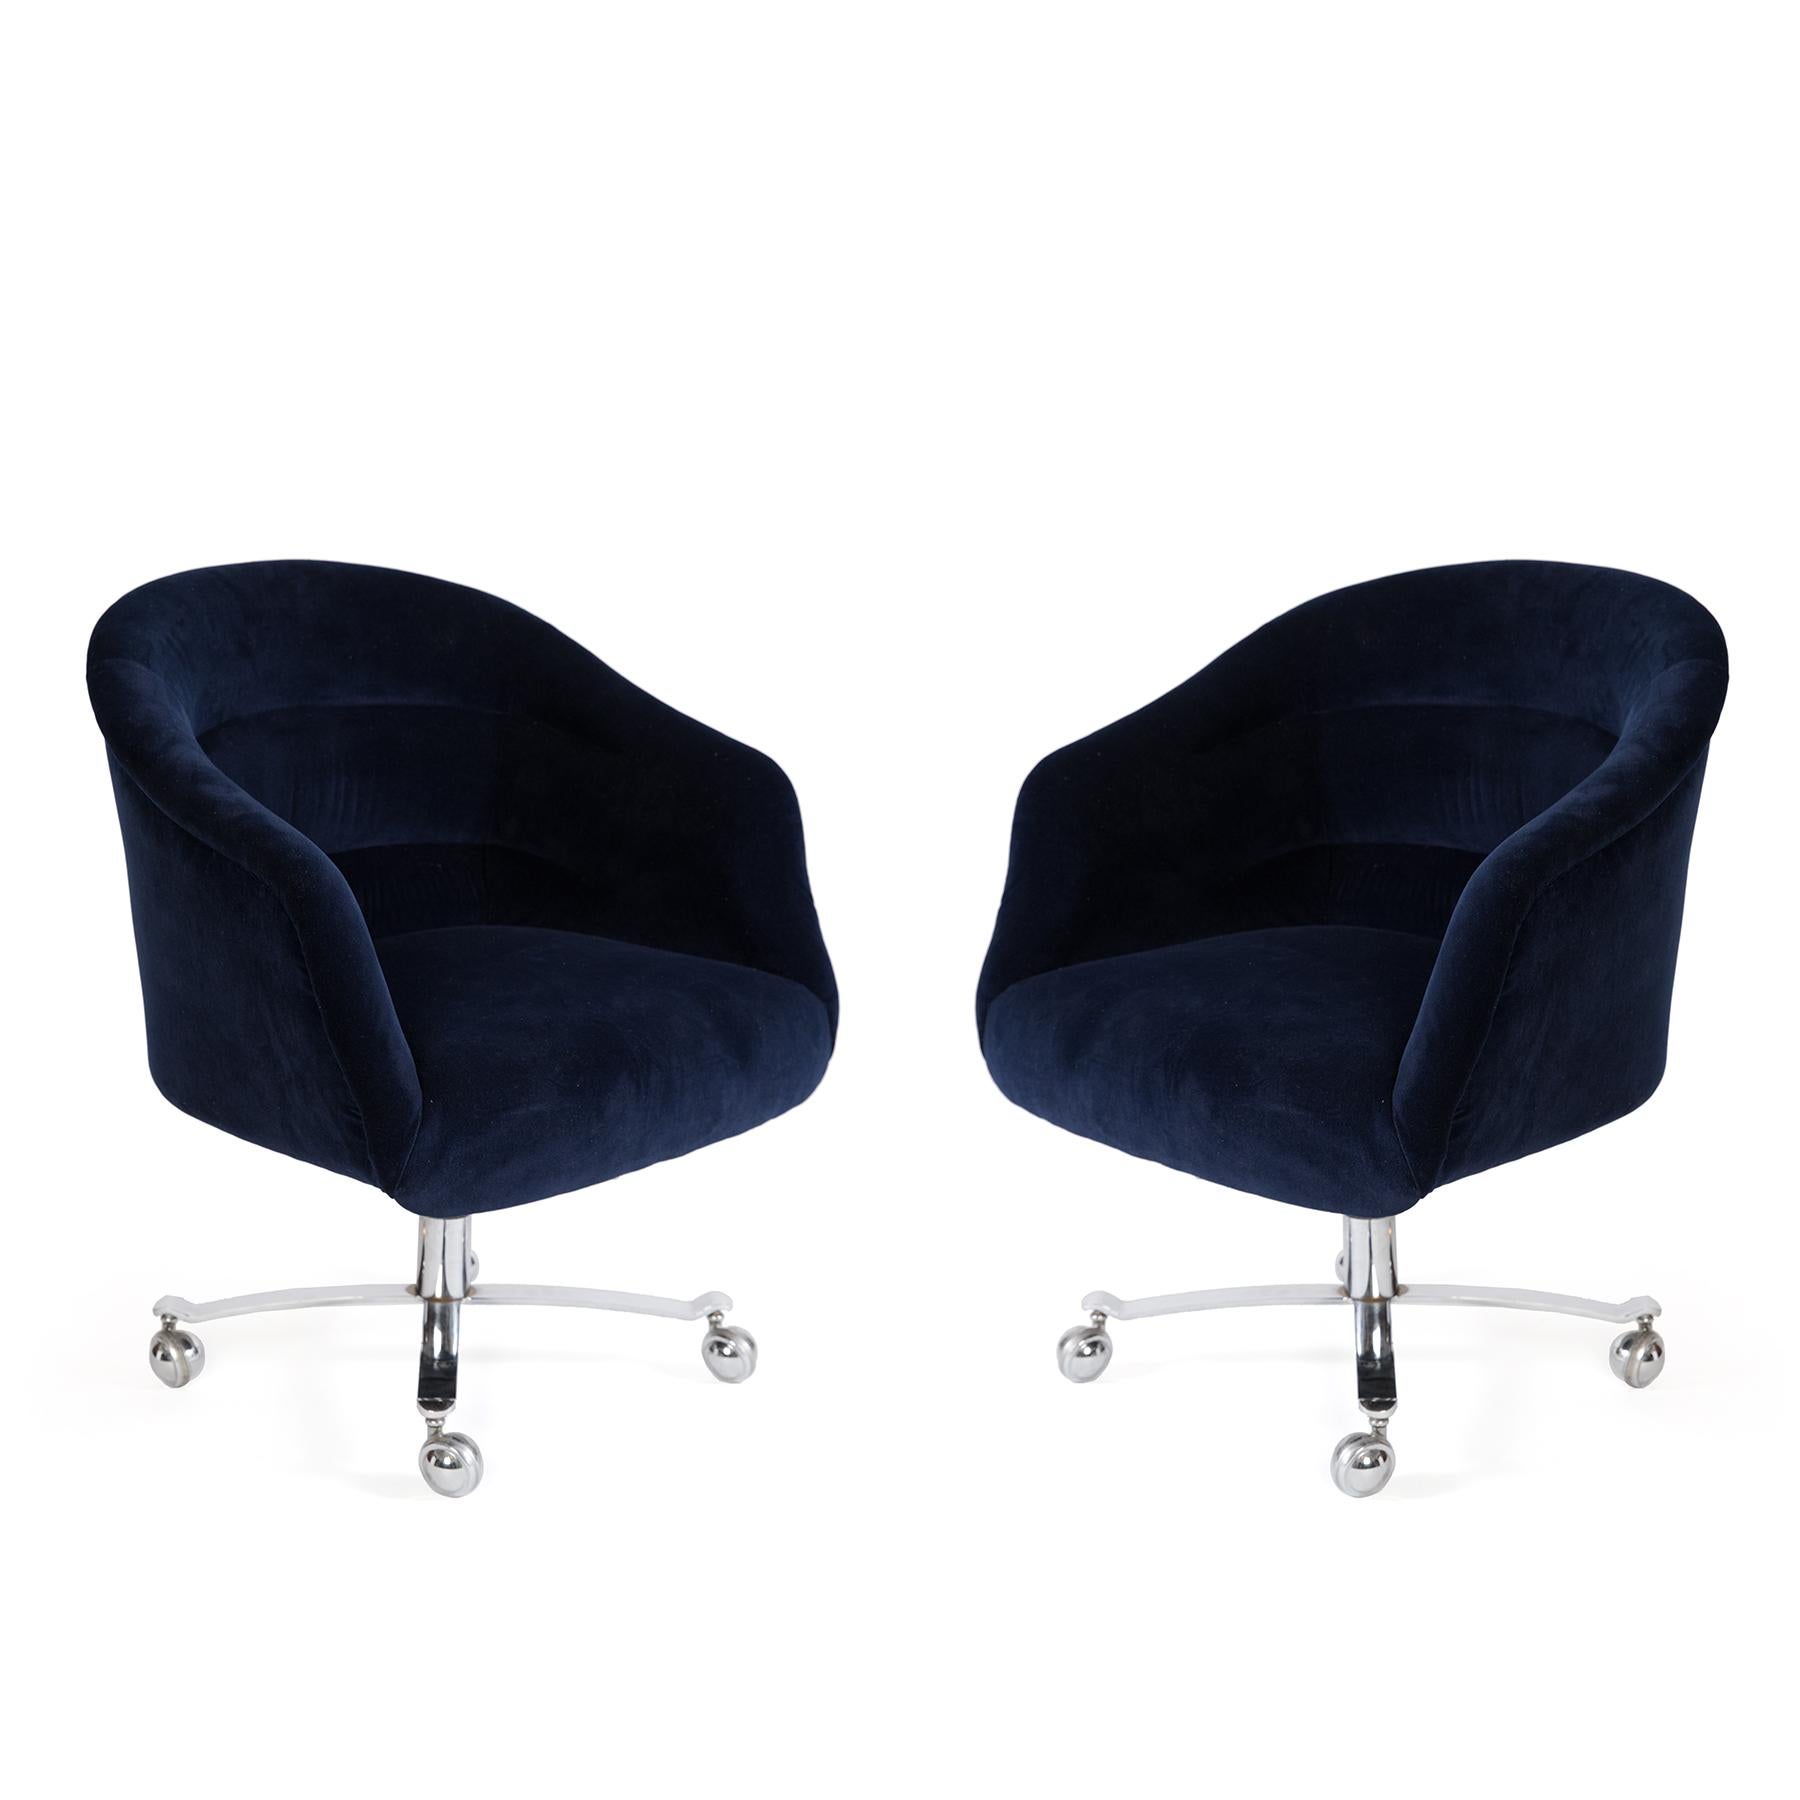 Pair of Ward Bennet office chairs, circa early 1970s. These examples have mirror polished chrome bases and have been newly upholstered in a navy mohair. Price listed is for the pair.